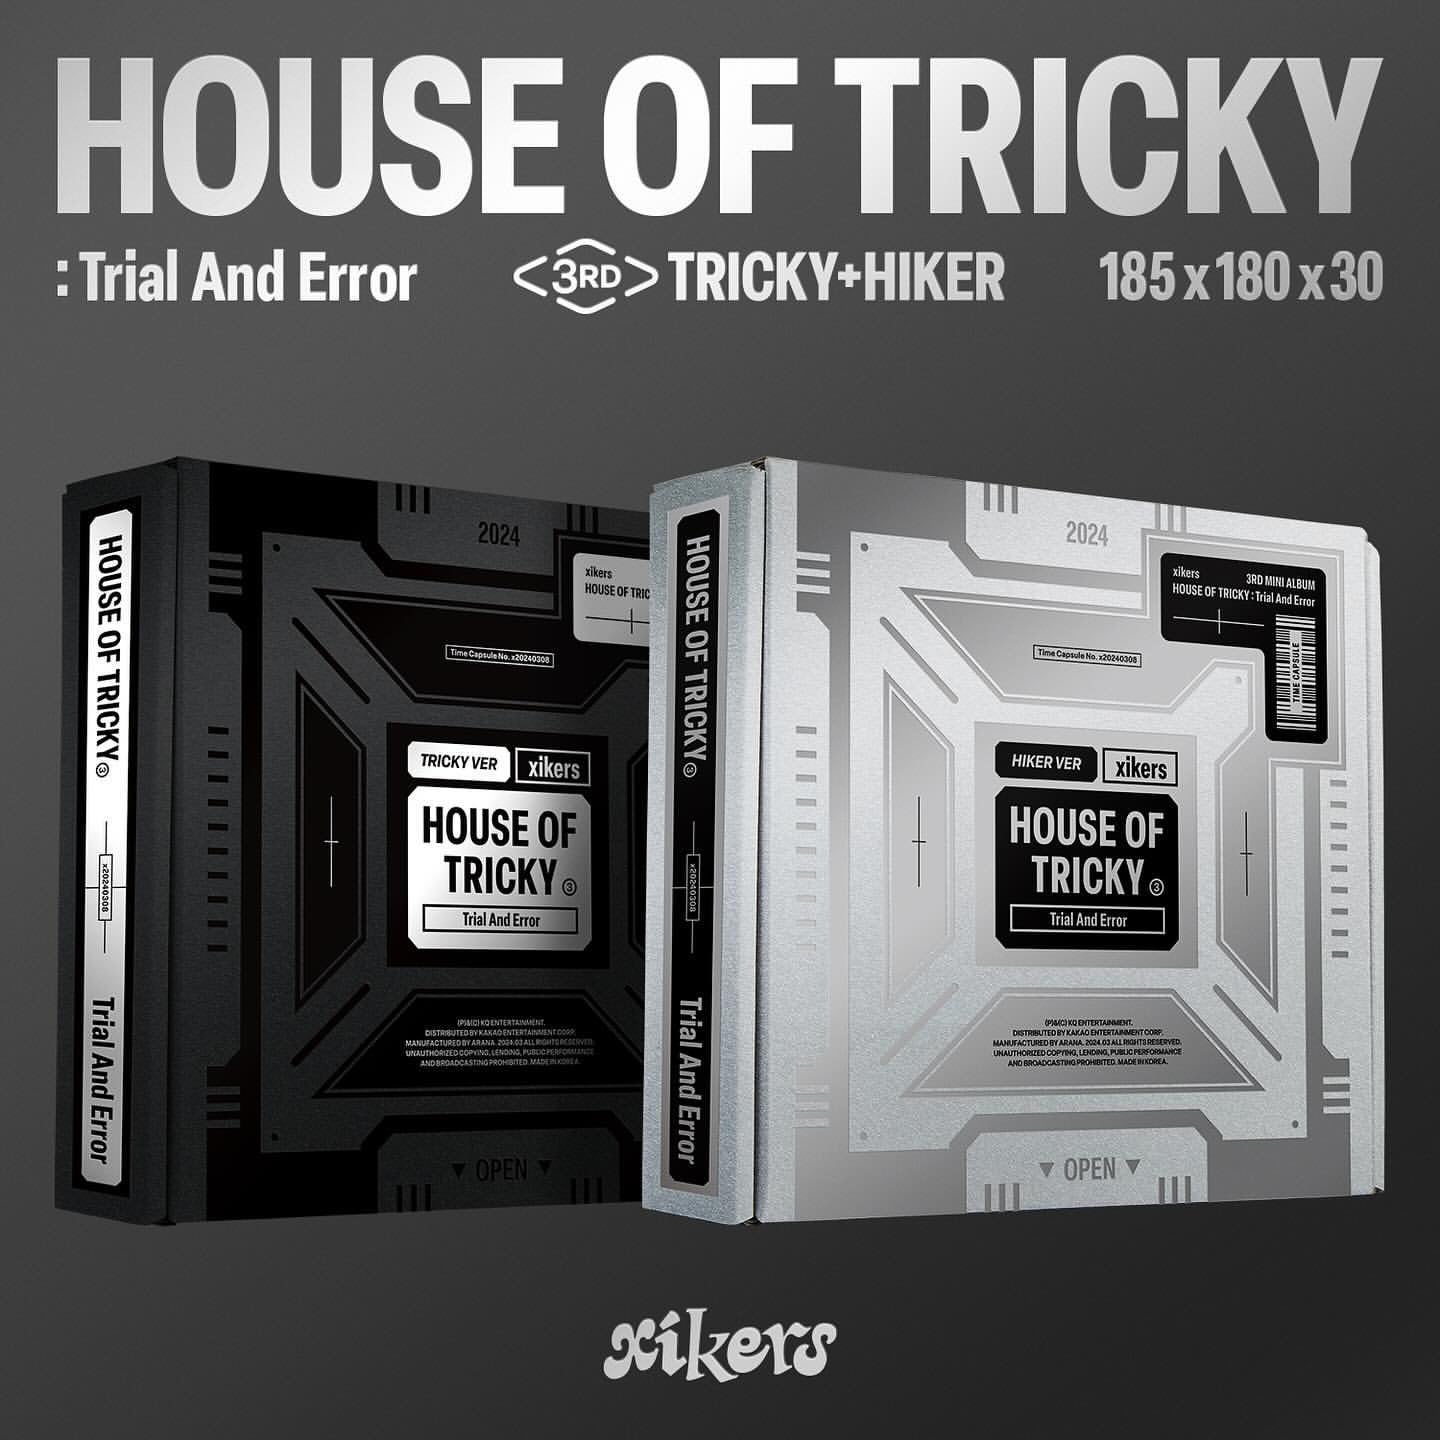 XIKERS - HOUSE OF TRICKY : TRIAL AND ERROR (2 VERSIONS)